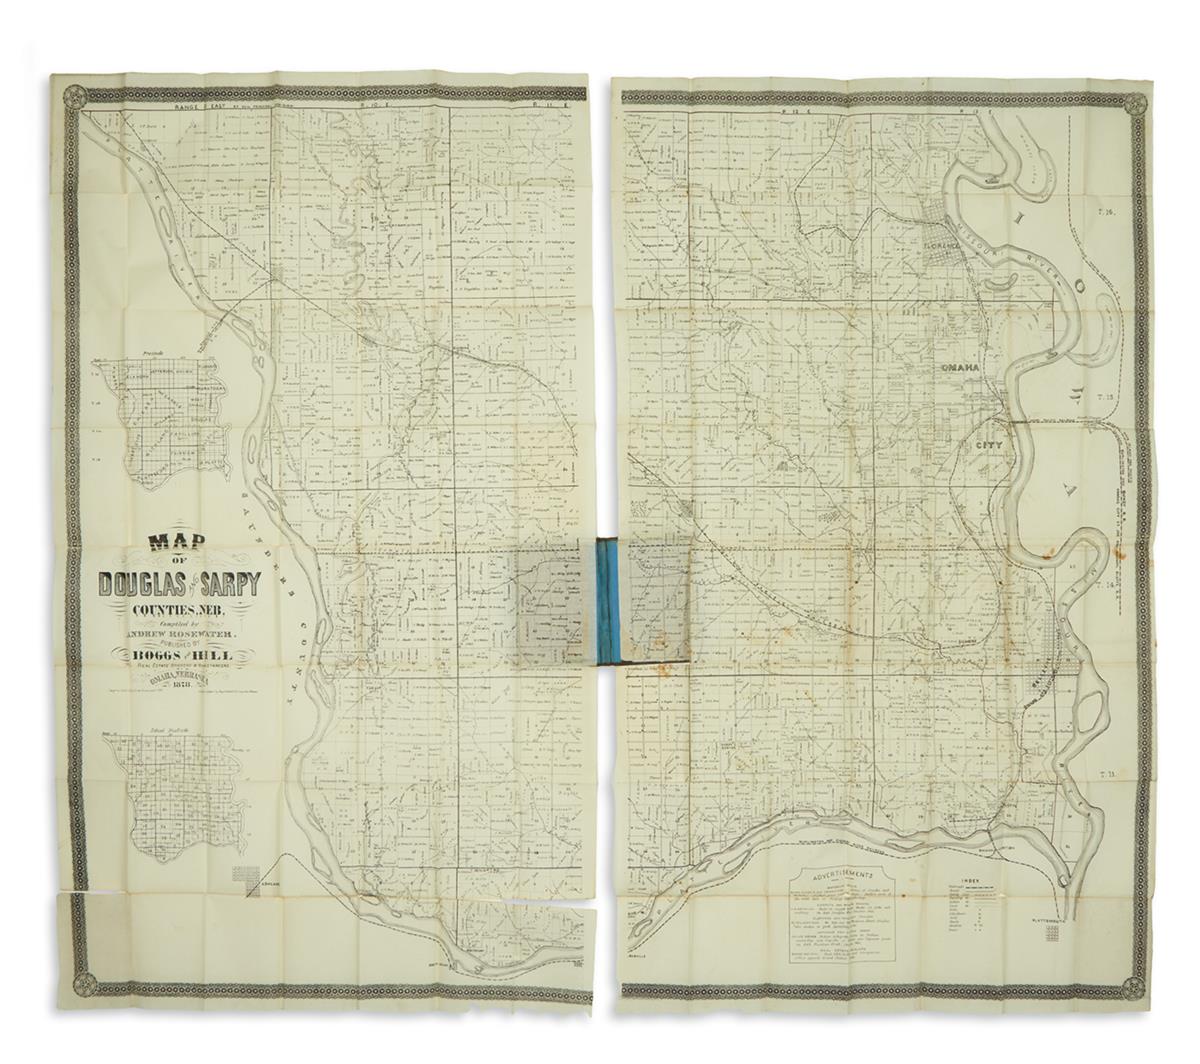 ROSEWATER, ANDREW. Map of Douglas and Sarpy Counties, Neb.